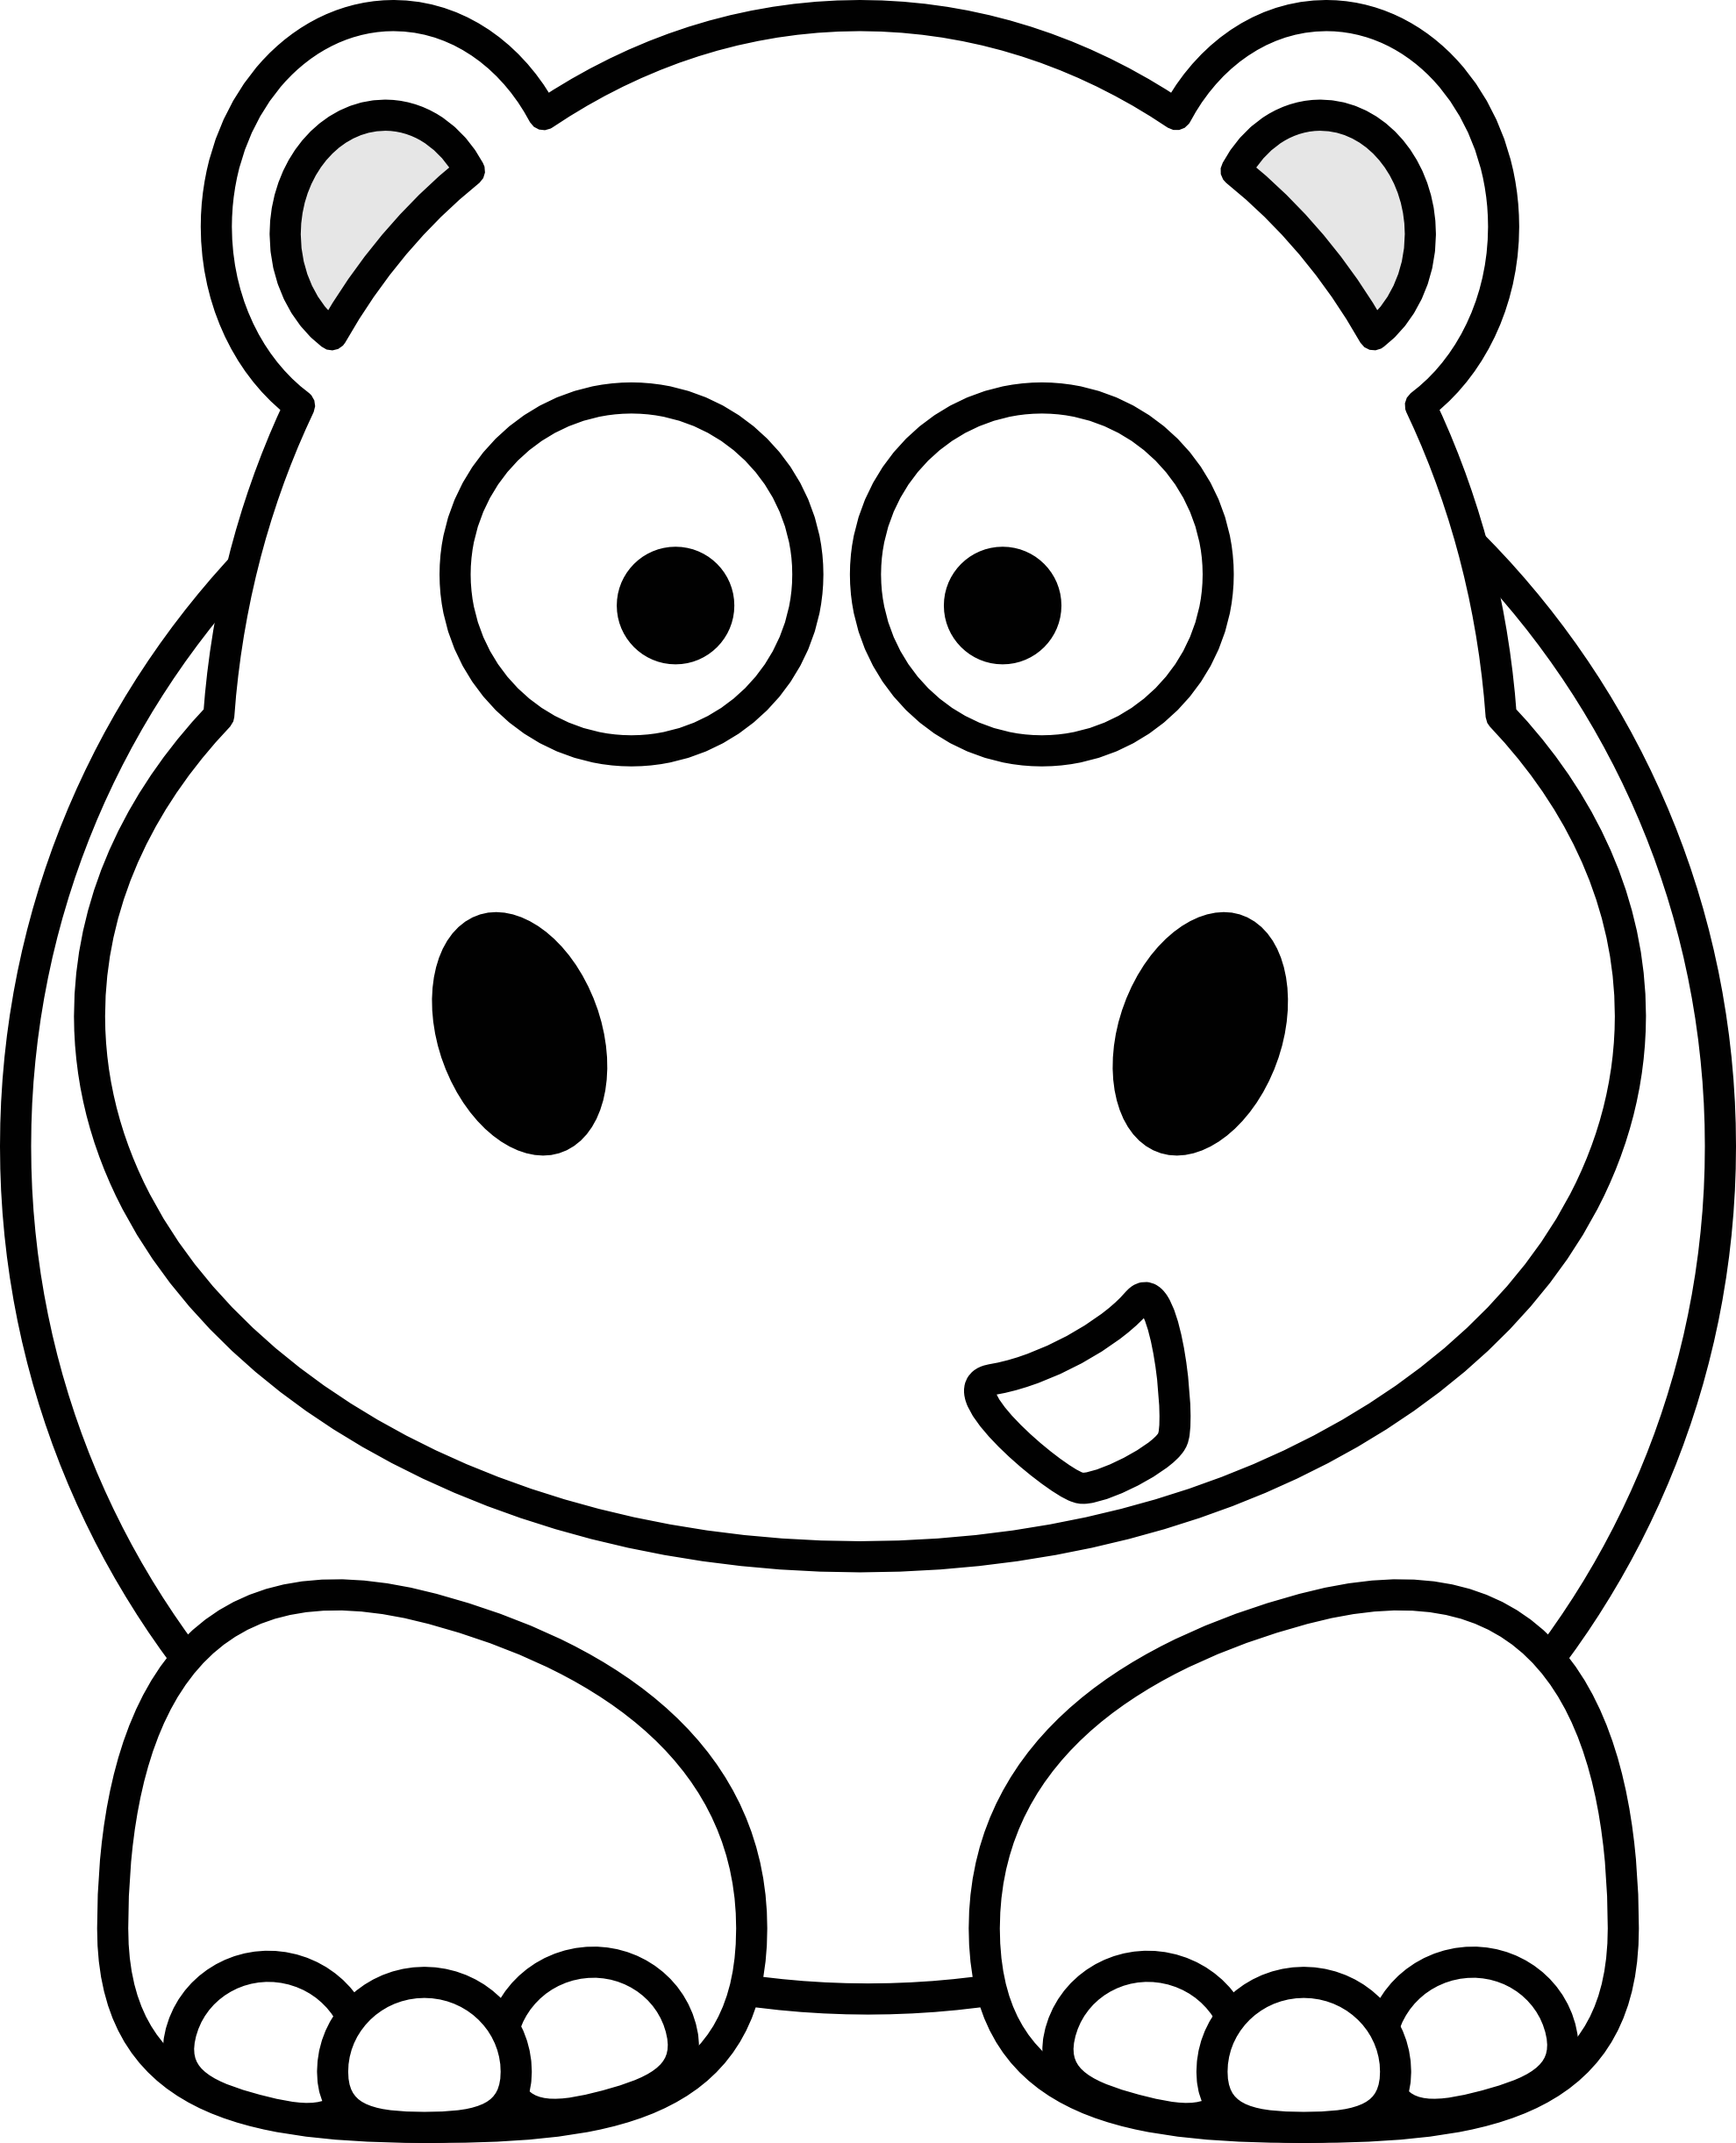 Hippo Clip Art Black And White | Clipart library - Free Clipart Images